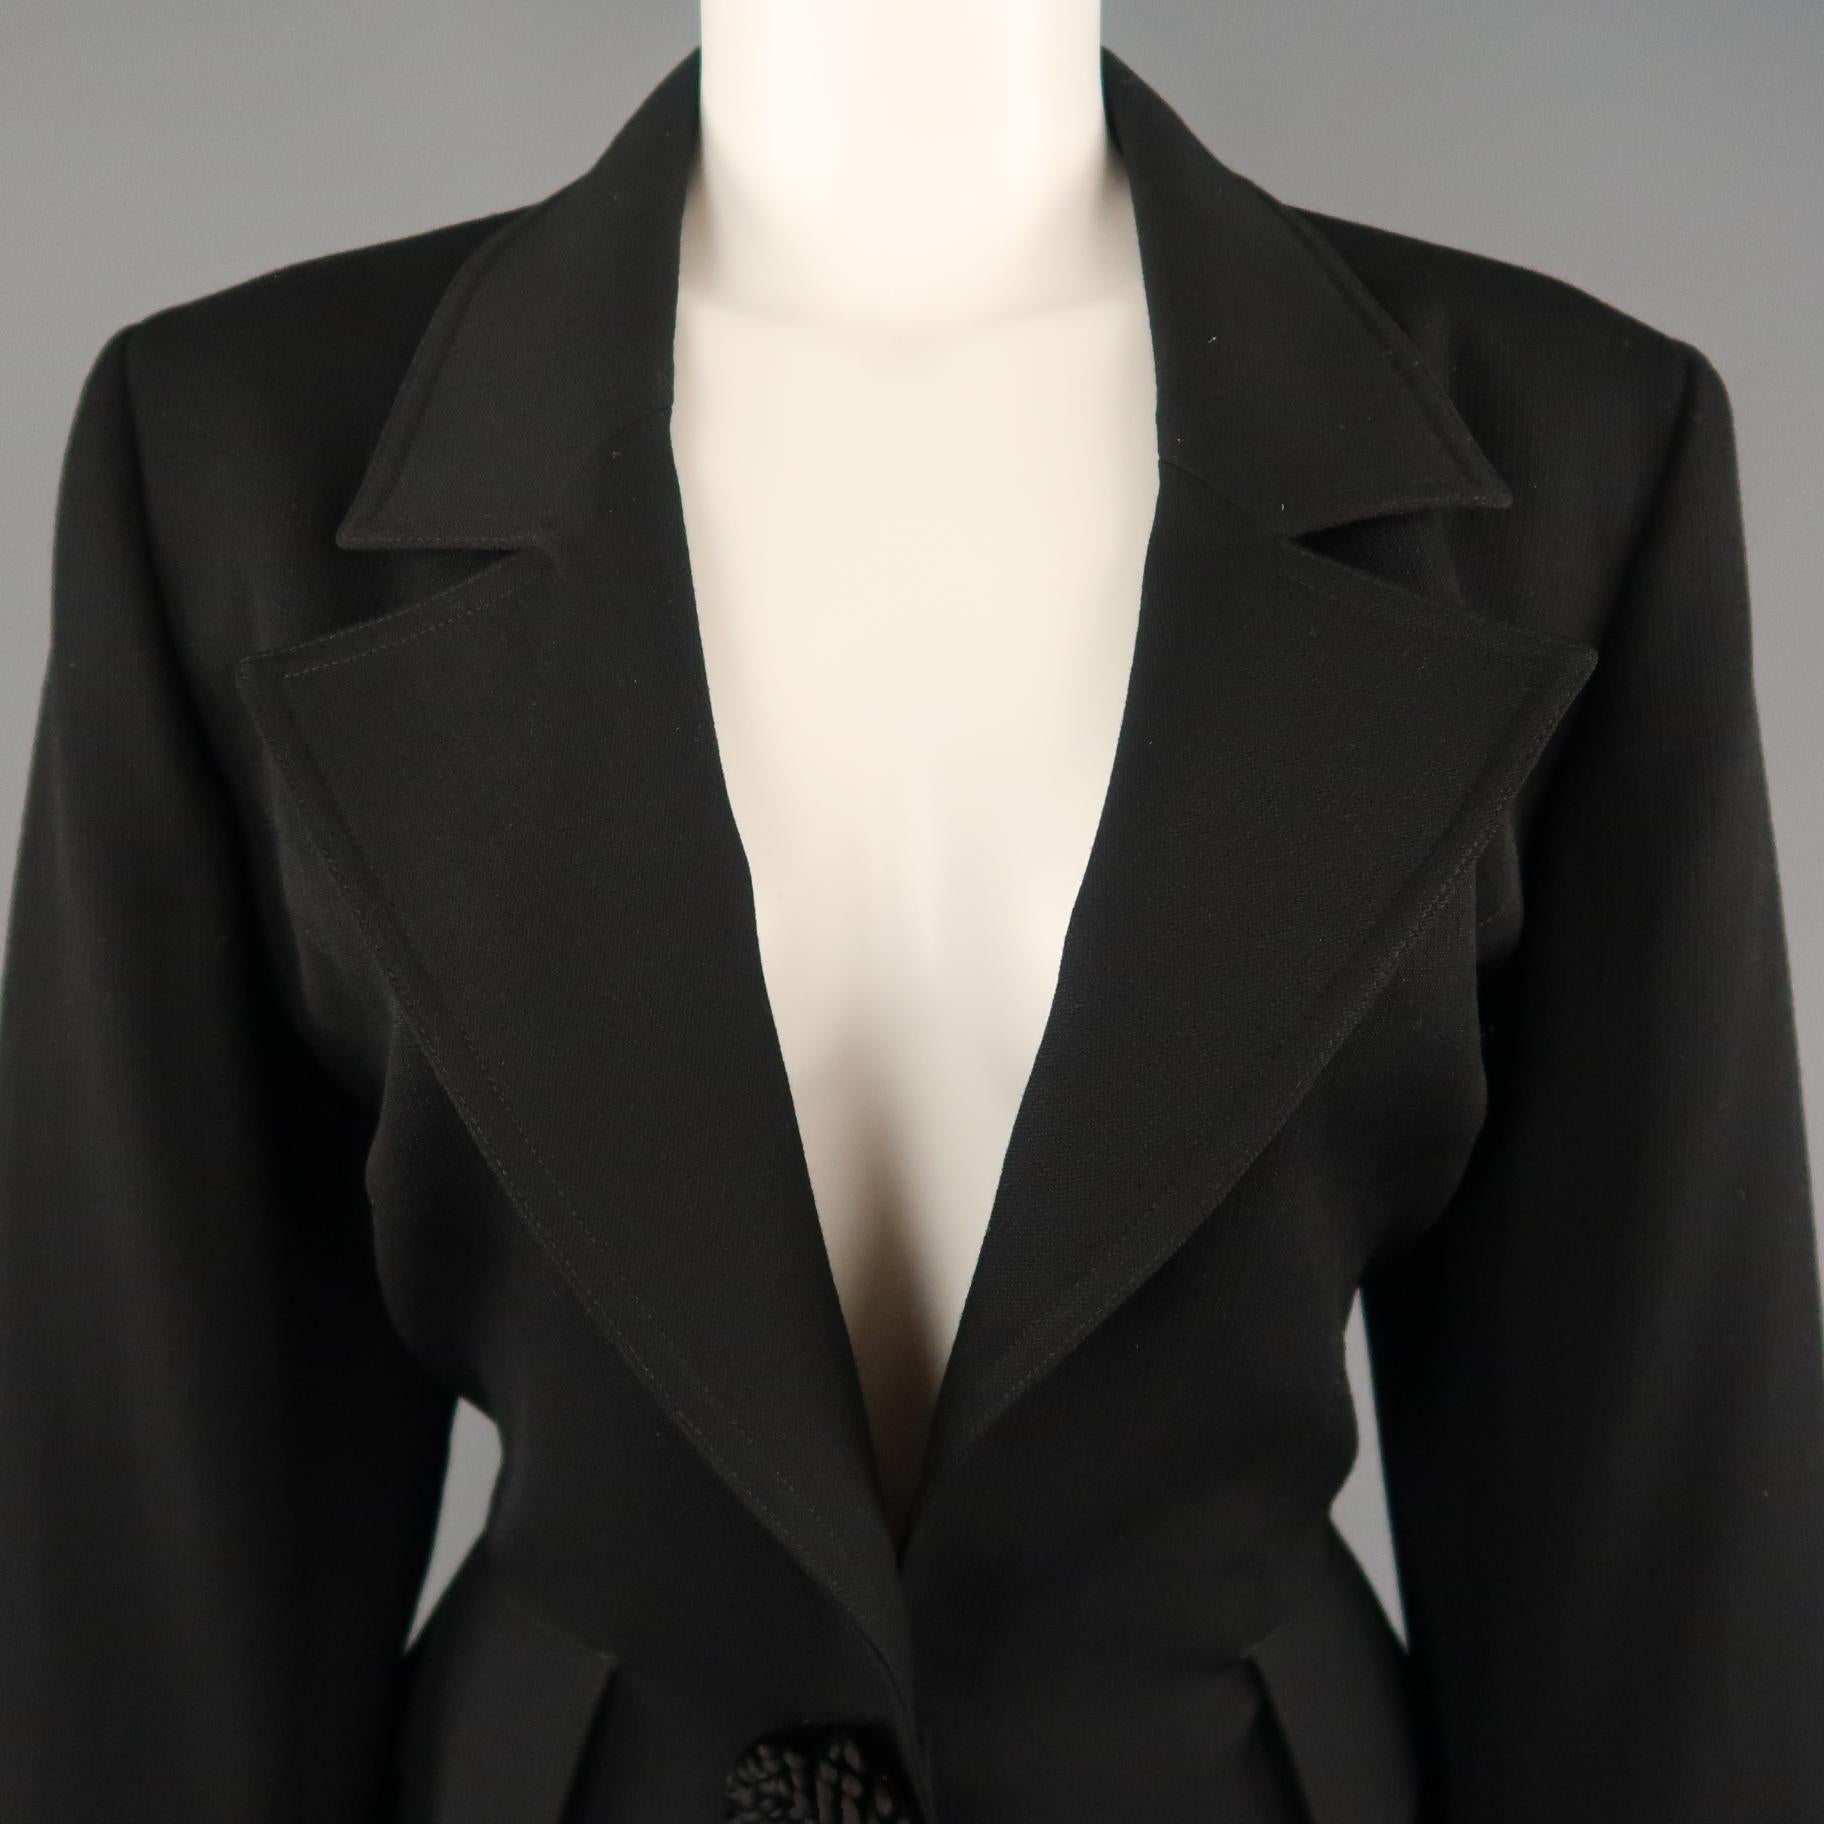 VALENTINO MISS V cropped sport jacket comes in black wool with a pointed lapel, flap pockets, single button closure, an fringe flower appliques. Made in Italy.
 
Excellent Pre-Owned Condition.
Marked: 12
 
Measurements:
 
Shoulder: 17 in.
Bust: 42